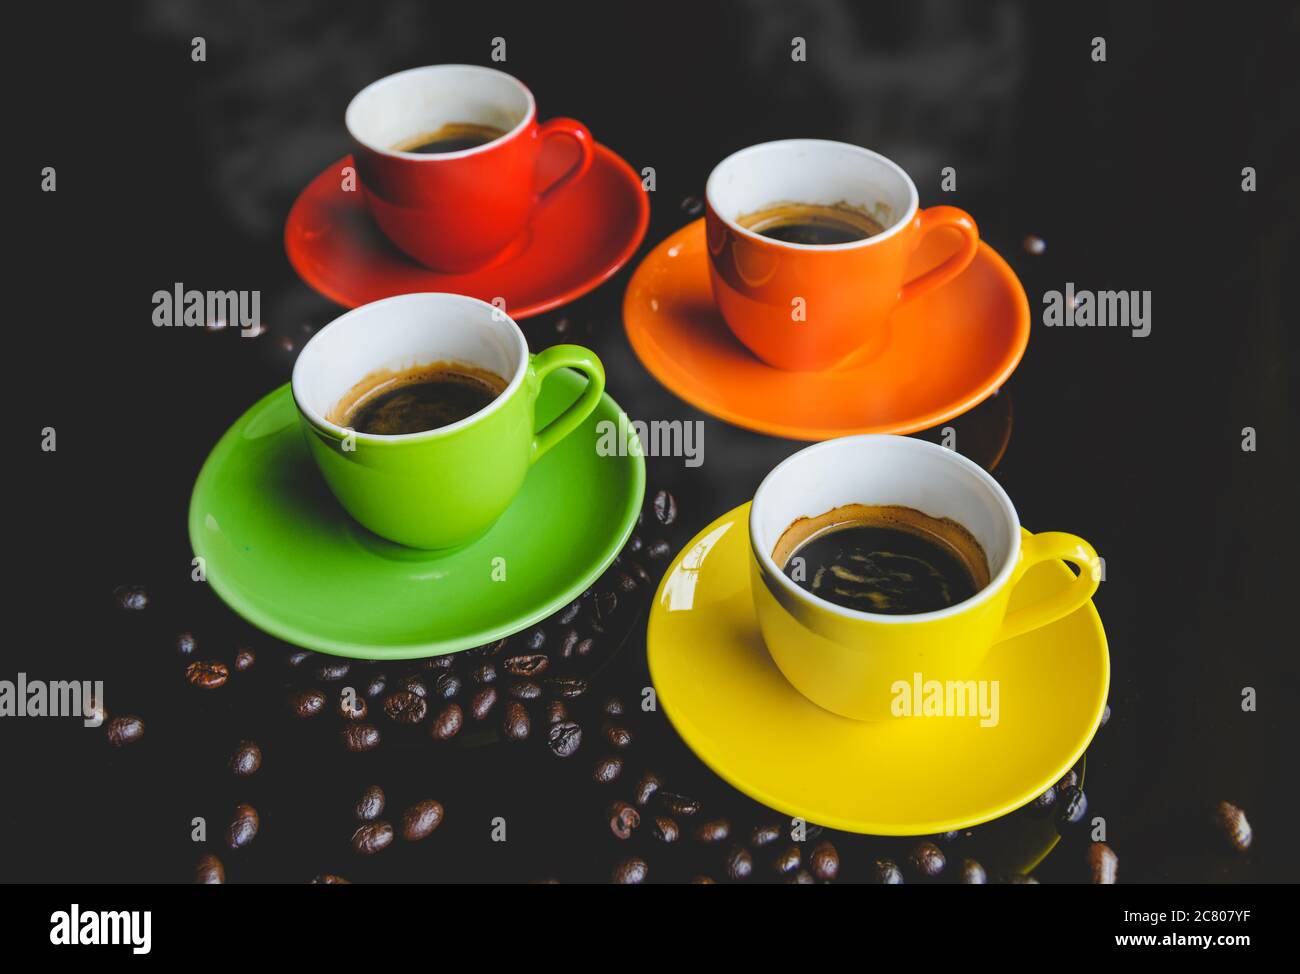 Colorful of espresso coffee cups setting with dark background and coffee bean. Stock Photo